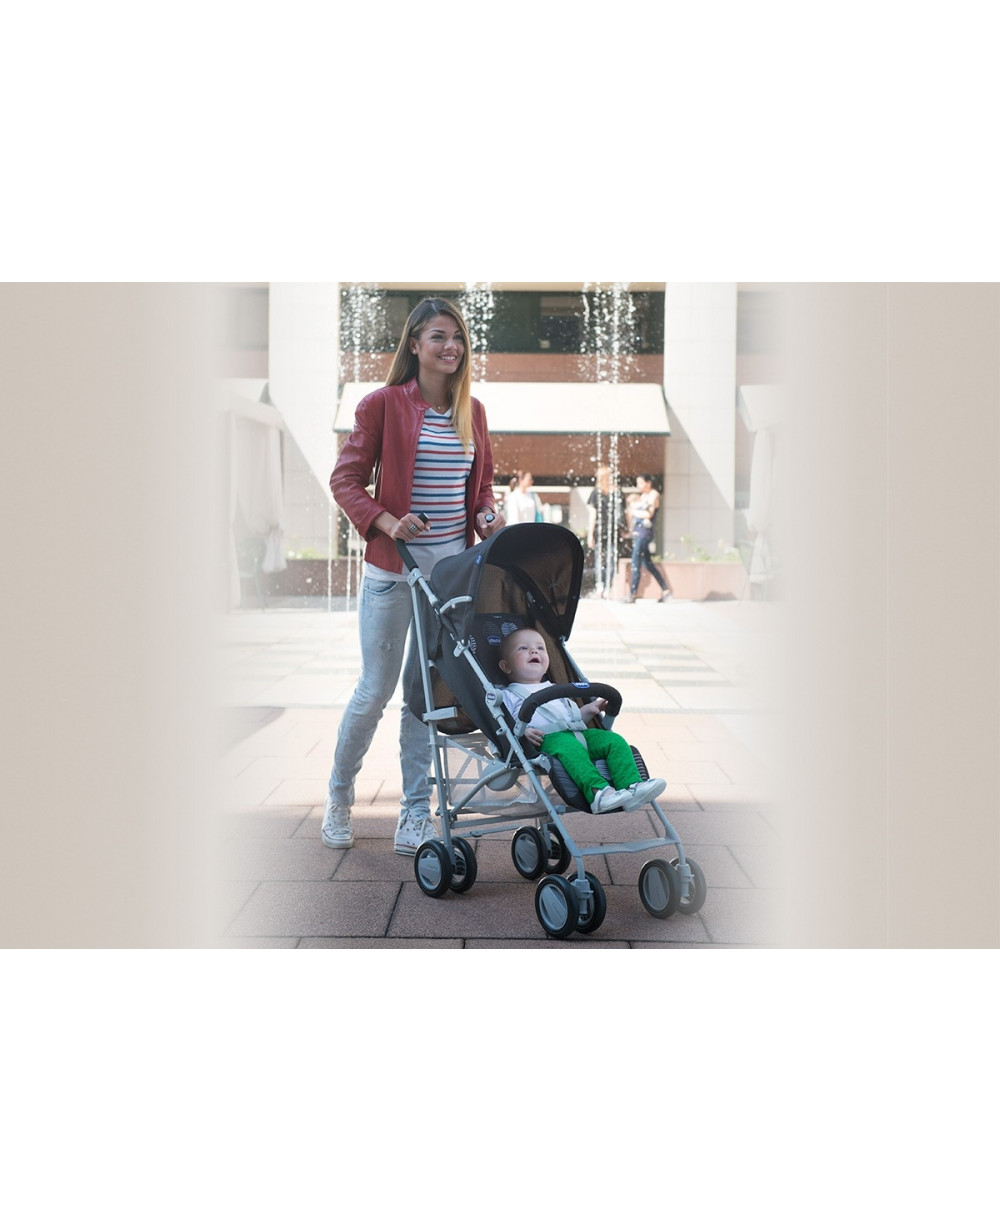 chicco london stroller weight